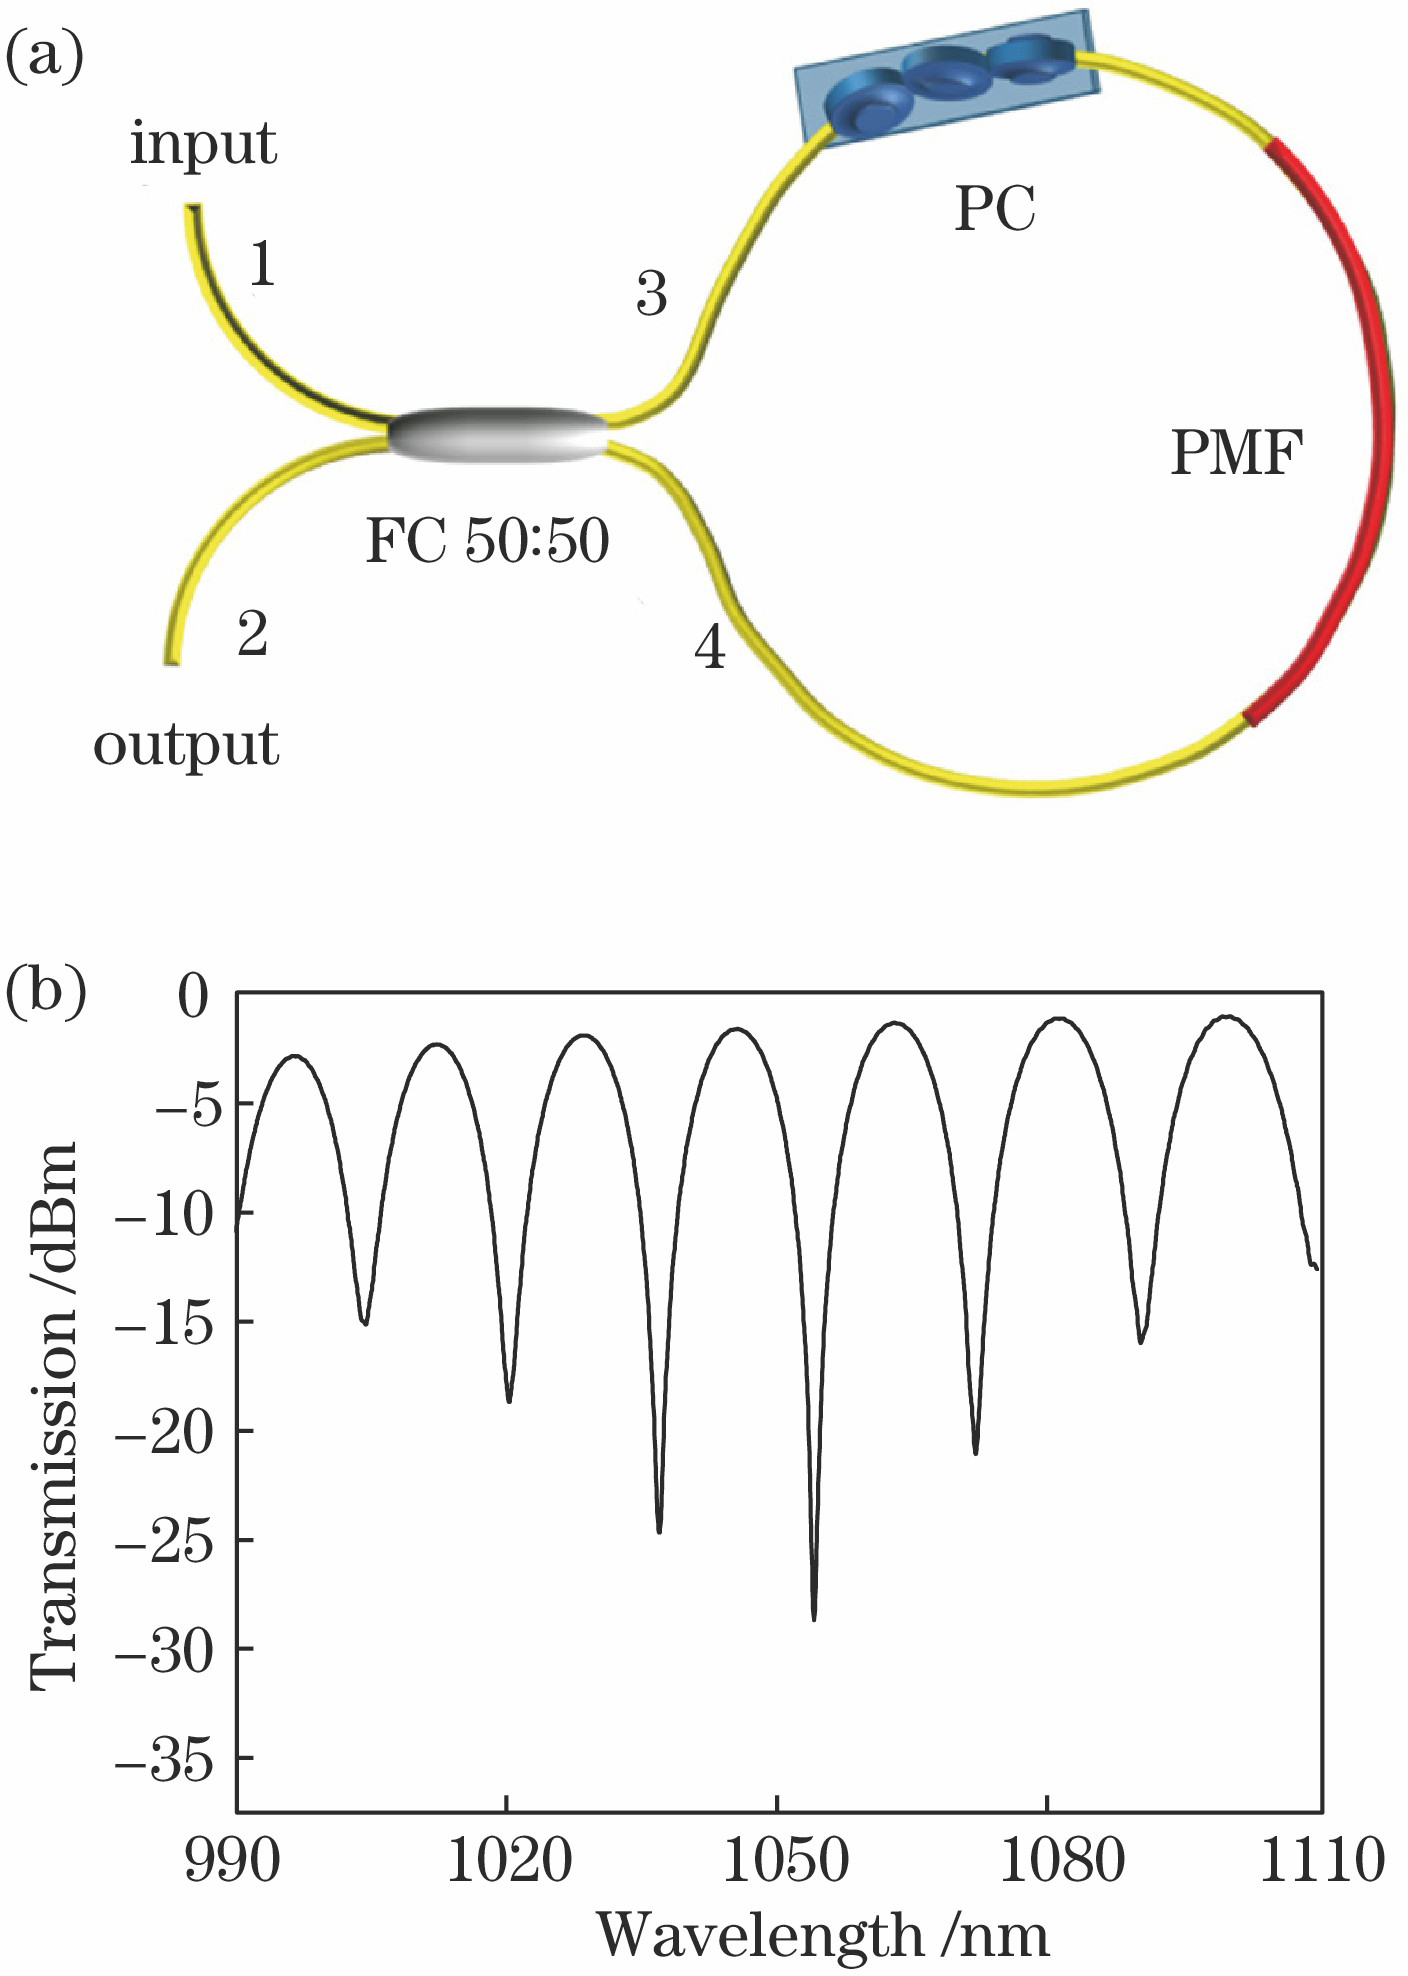 Sagnac loop based on polarization maintaining fiber. (a) Structure; (b) transmitted spectrum